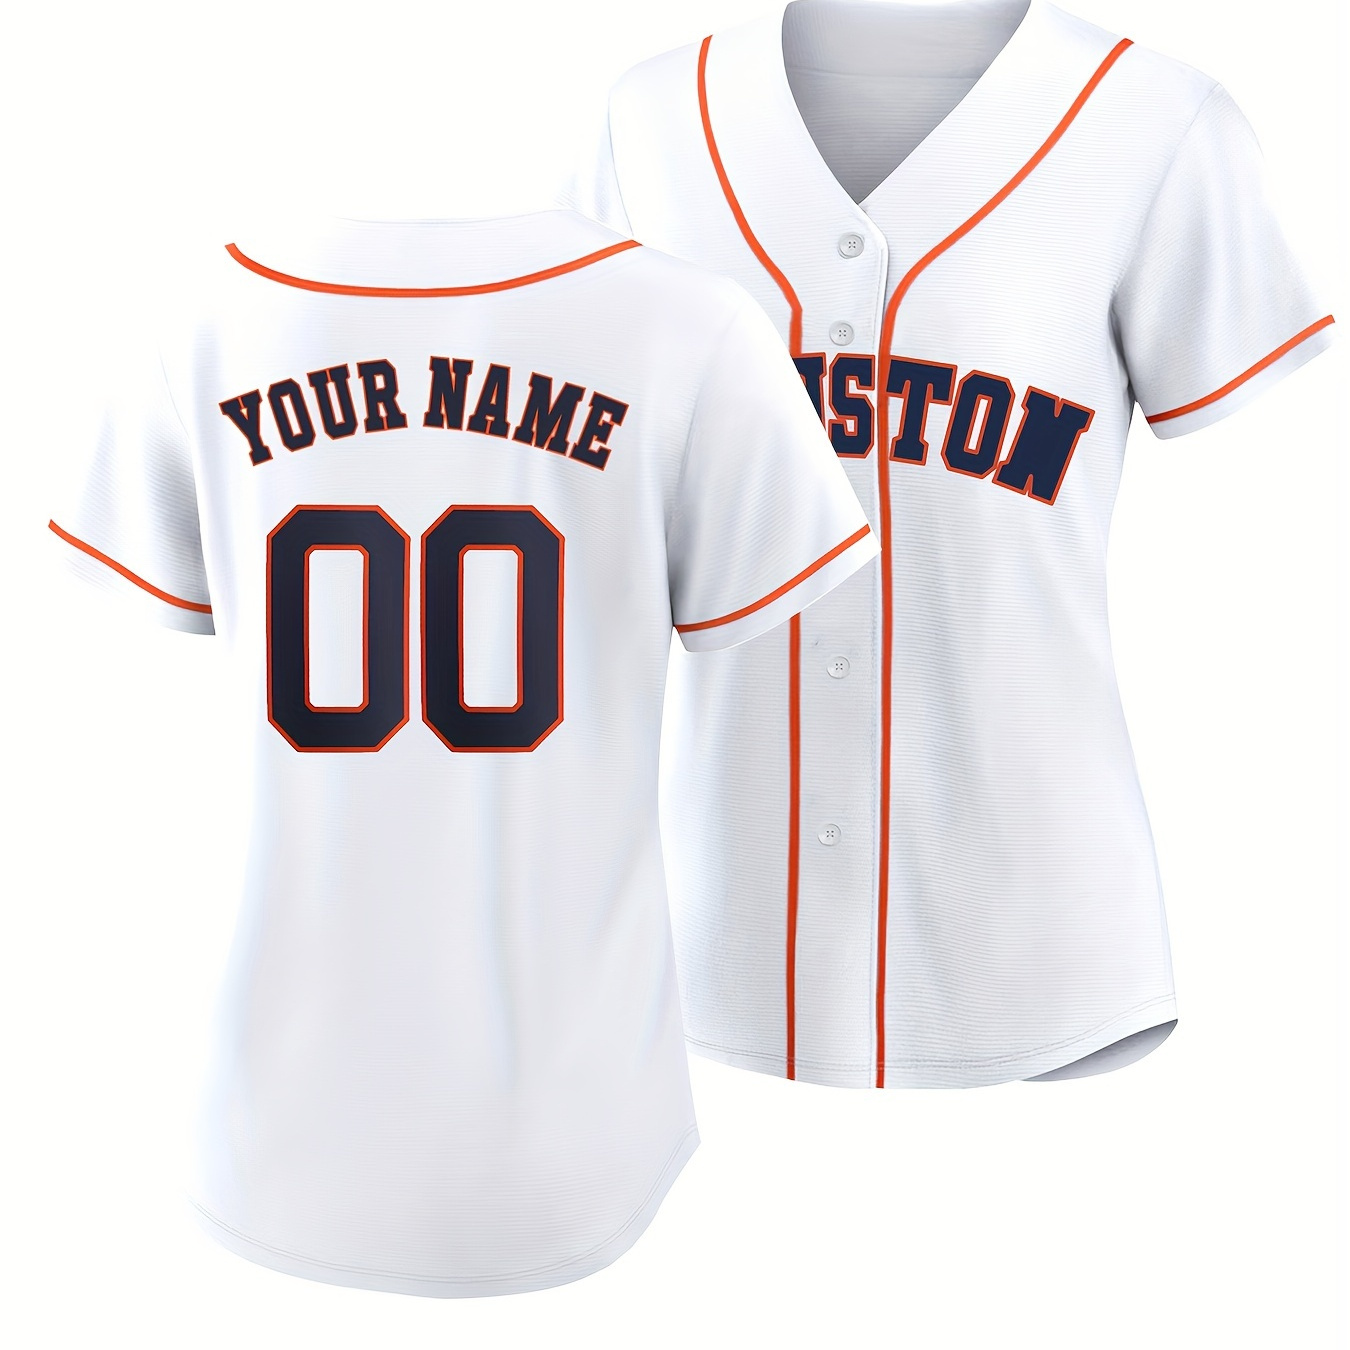 

Customizable Women's Baseball Jersey, Custom Name And Number, Embroidered Letters, Soft Fabric, Button Closure, V-neck Design, Athletic Style